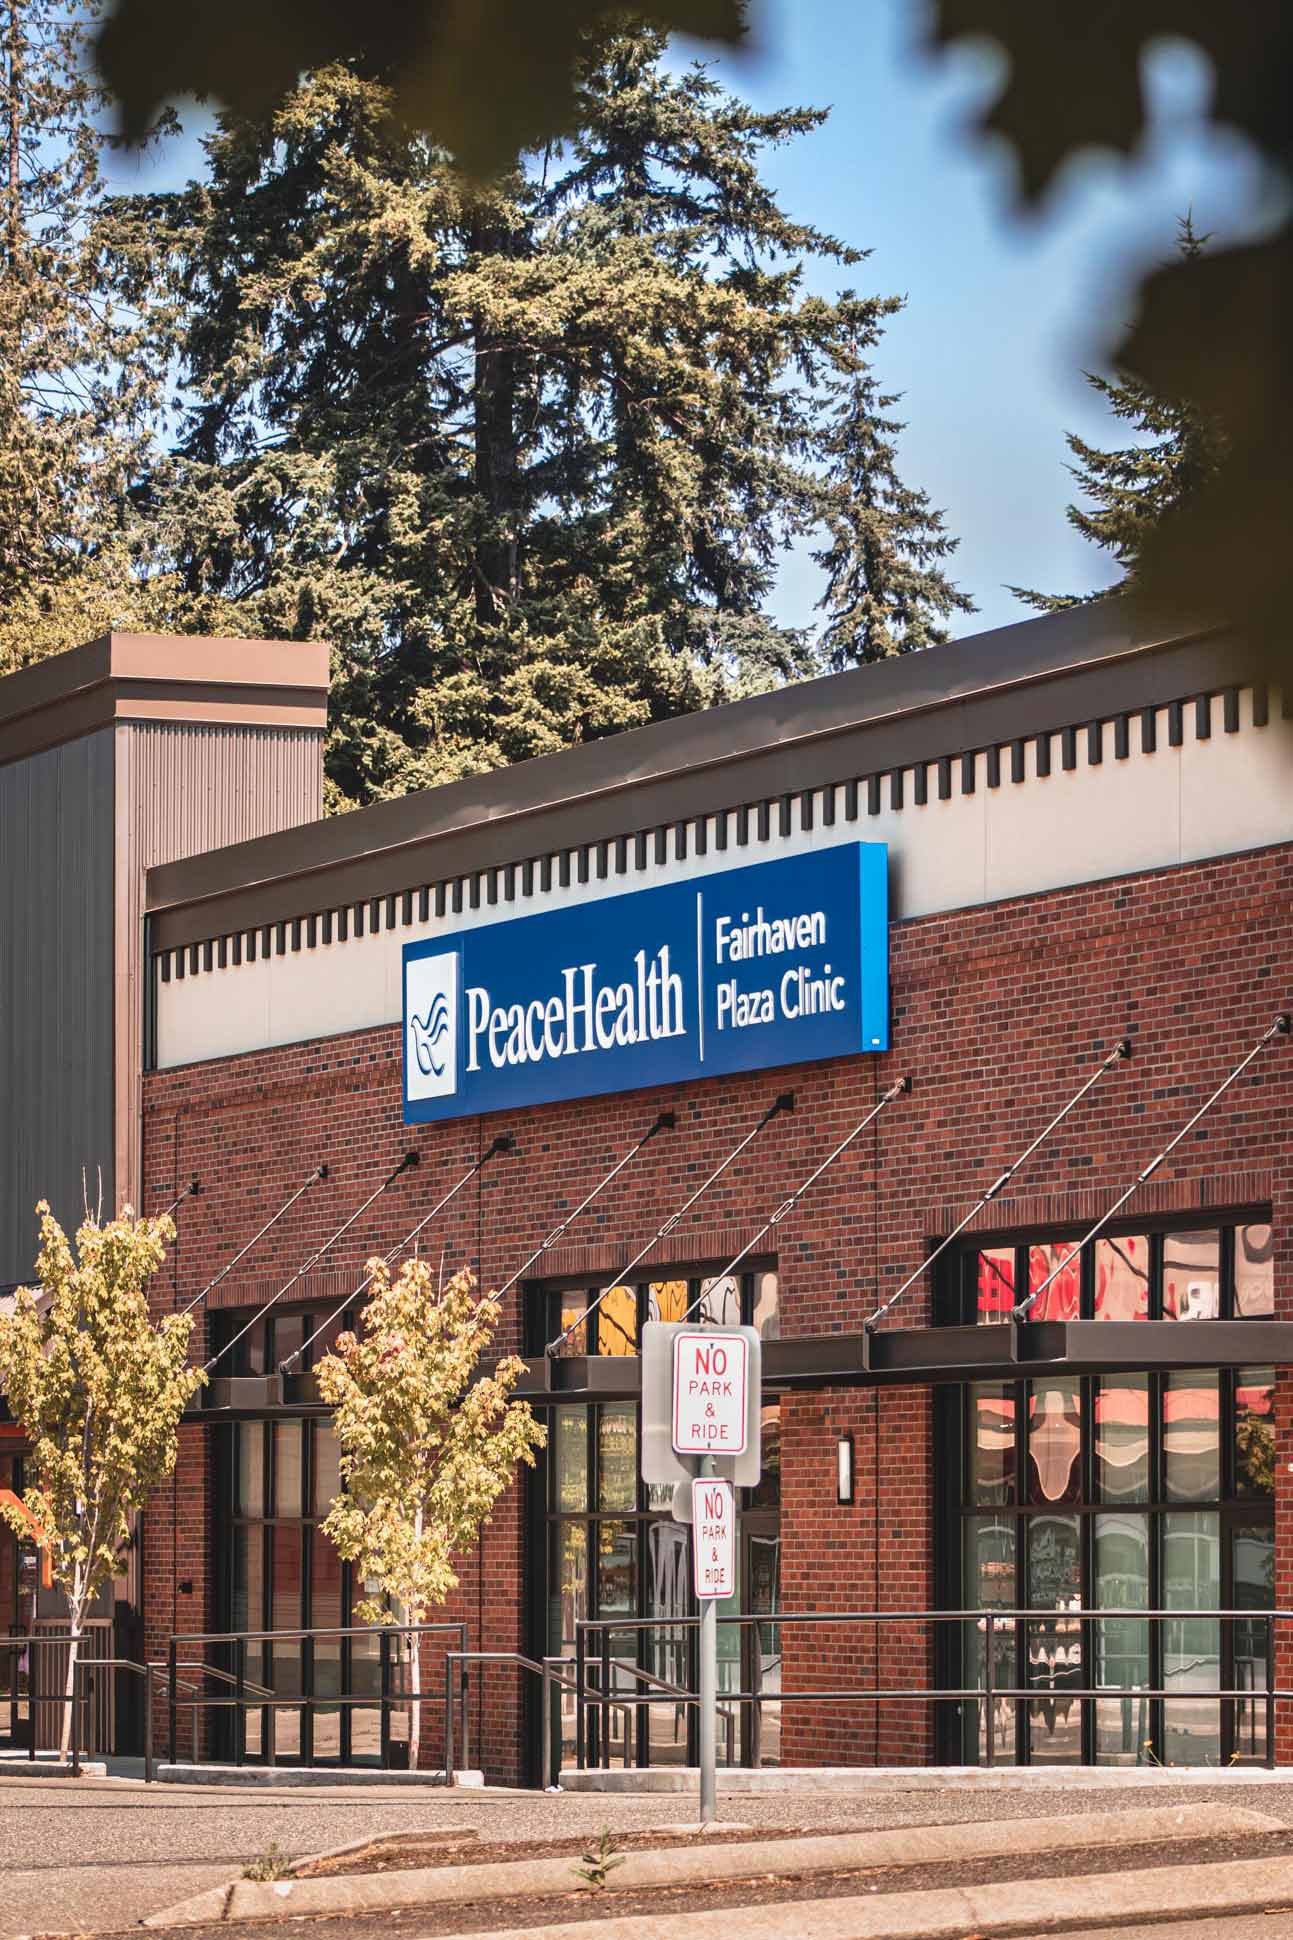 healthcare-peace-health-fairhaven-plaza-clinic-cabinet-sign-street-view